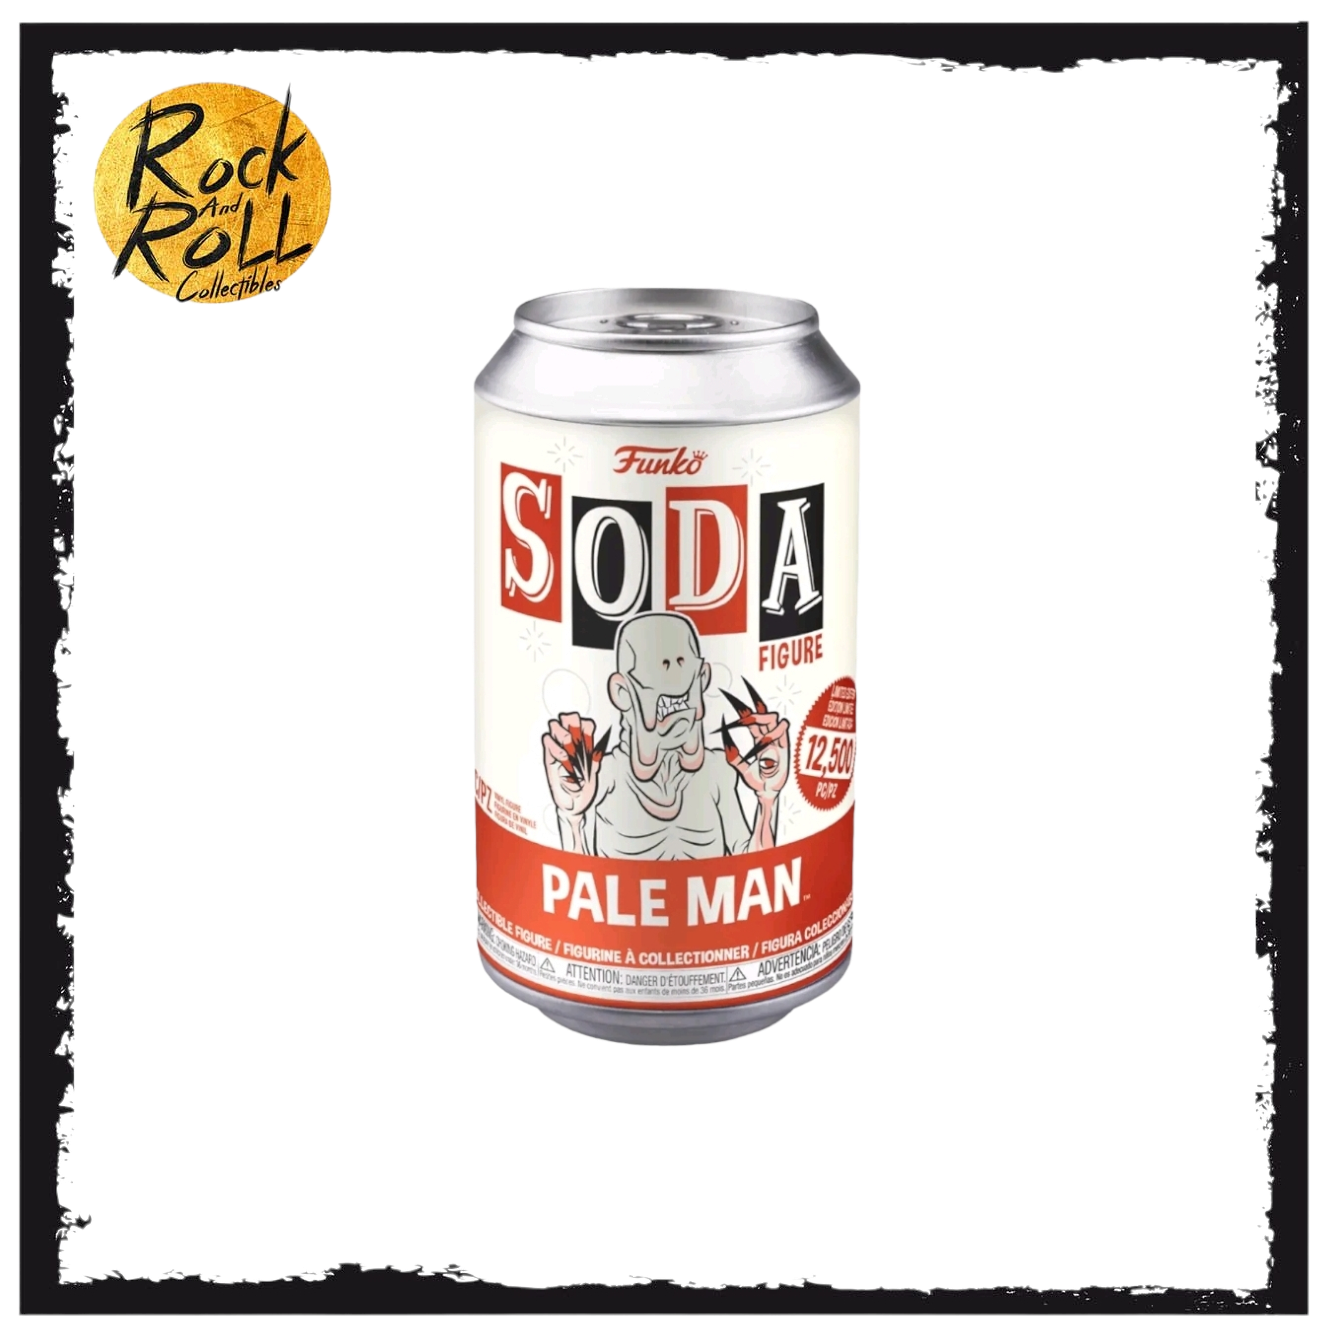 Funko Soda - Pale Man Figure In Soda Can Chance Of Chase!  Pan’s Labyrinth